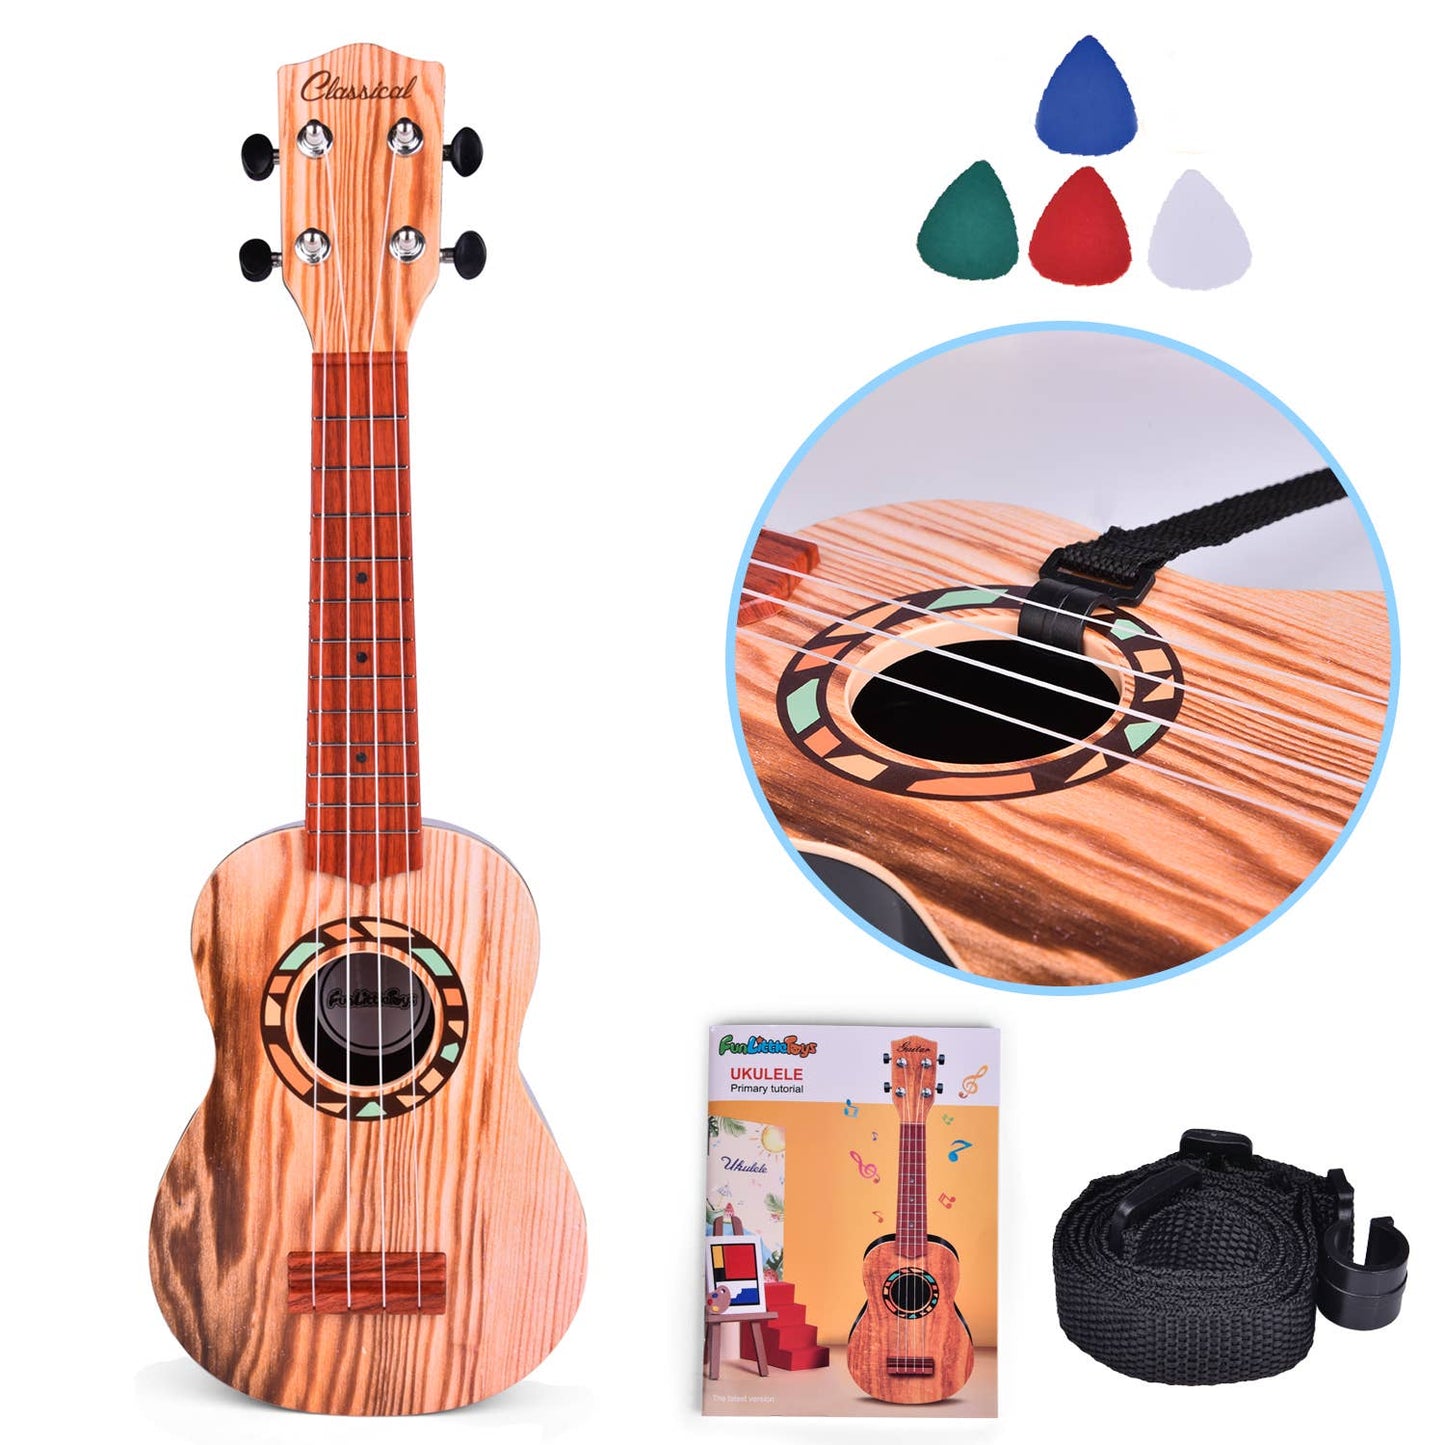 21 Inch Toy Guitar Ukulele for Kids Musical Instruments